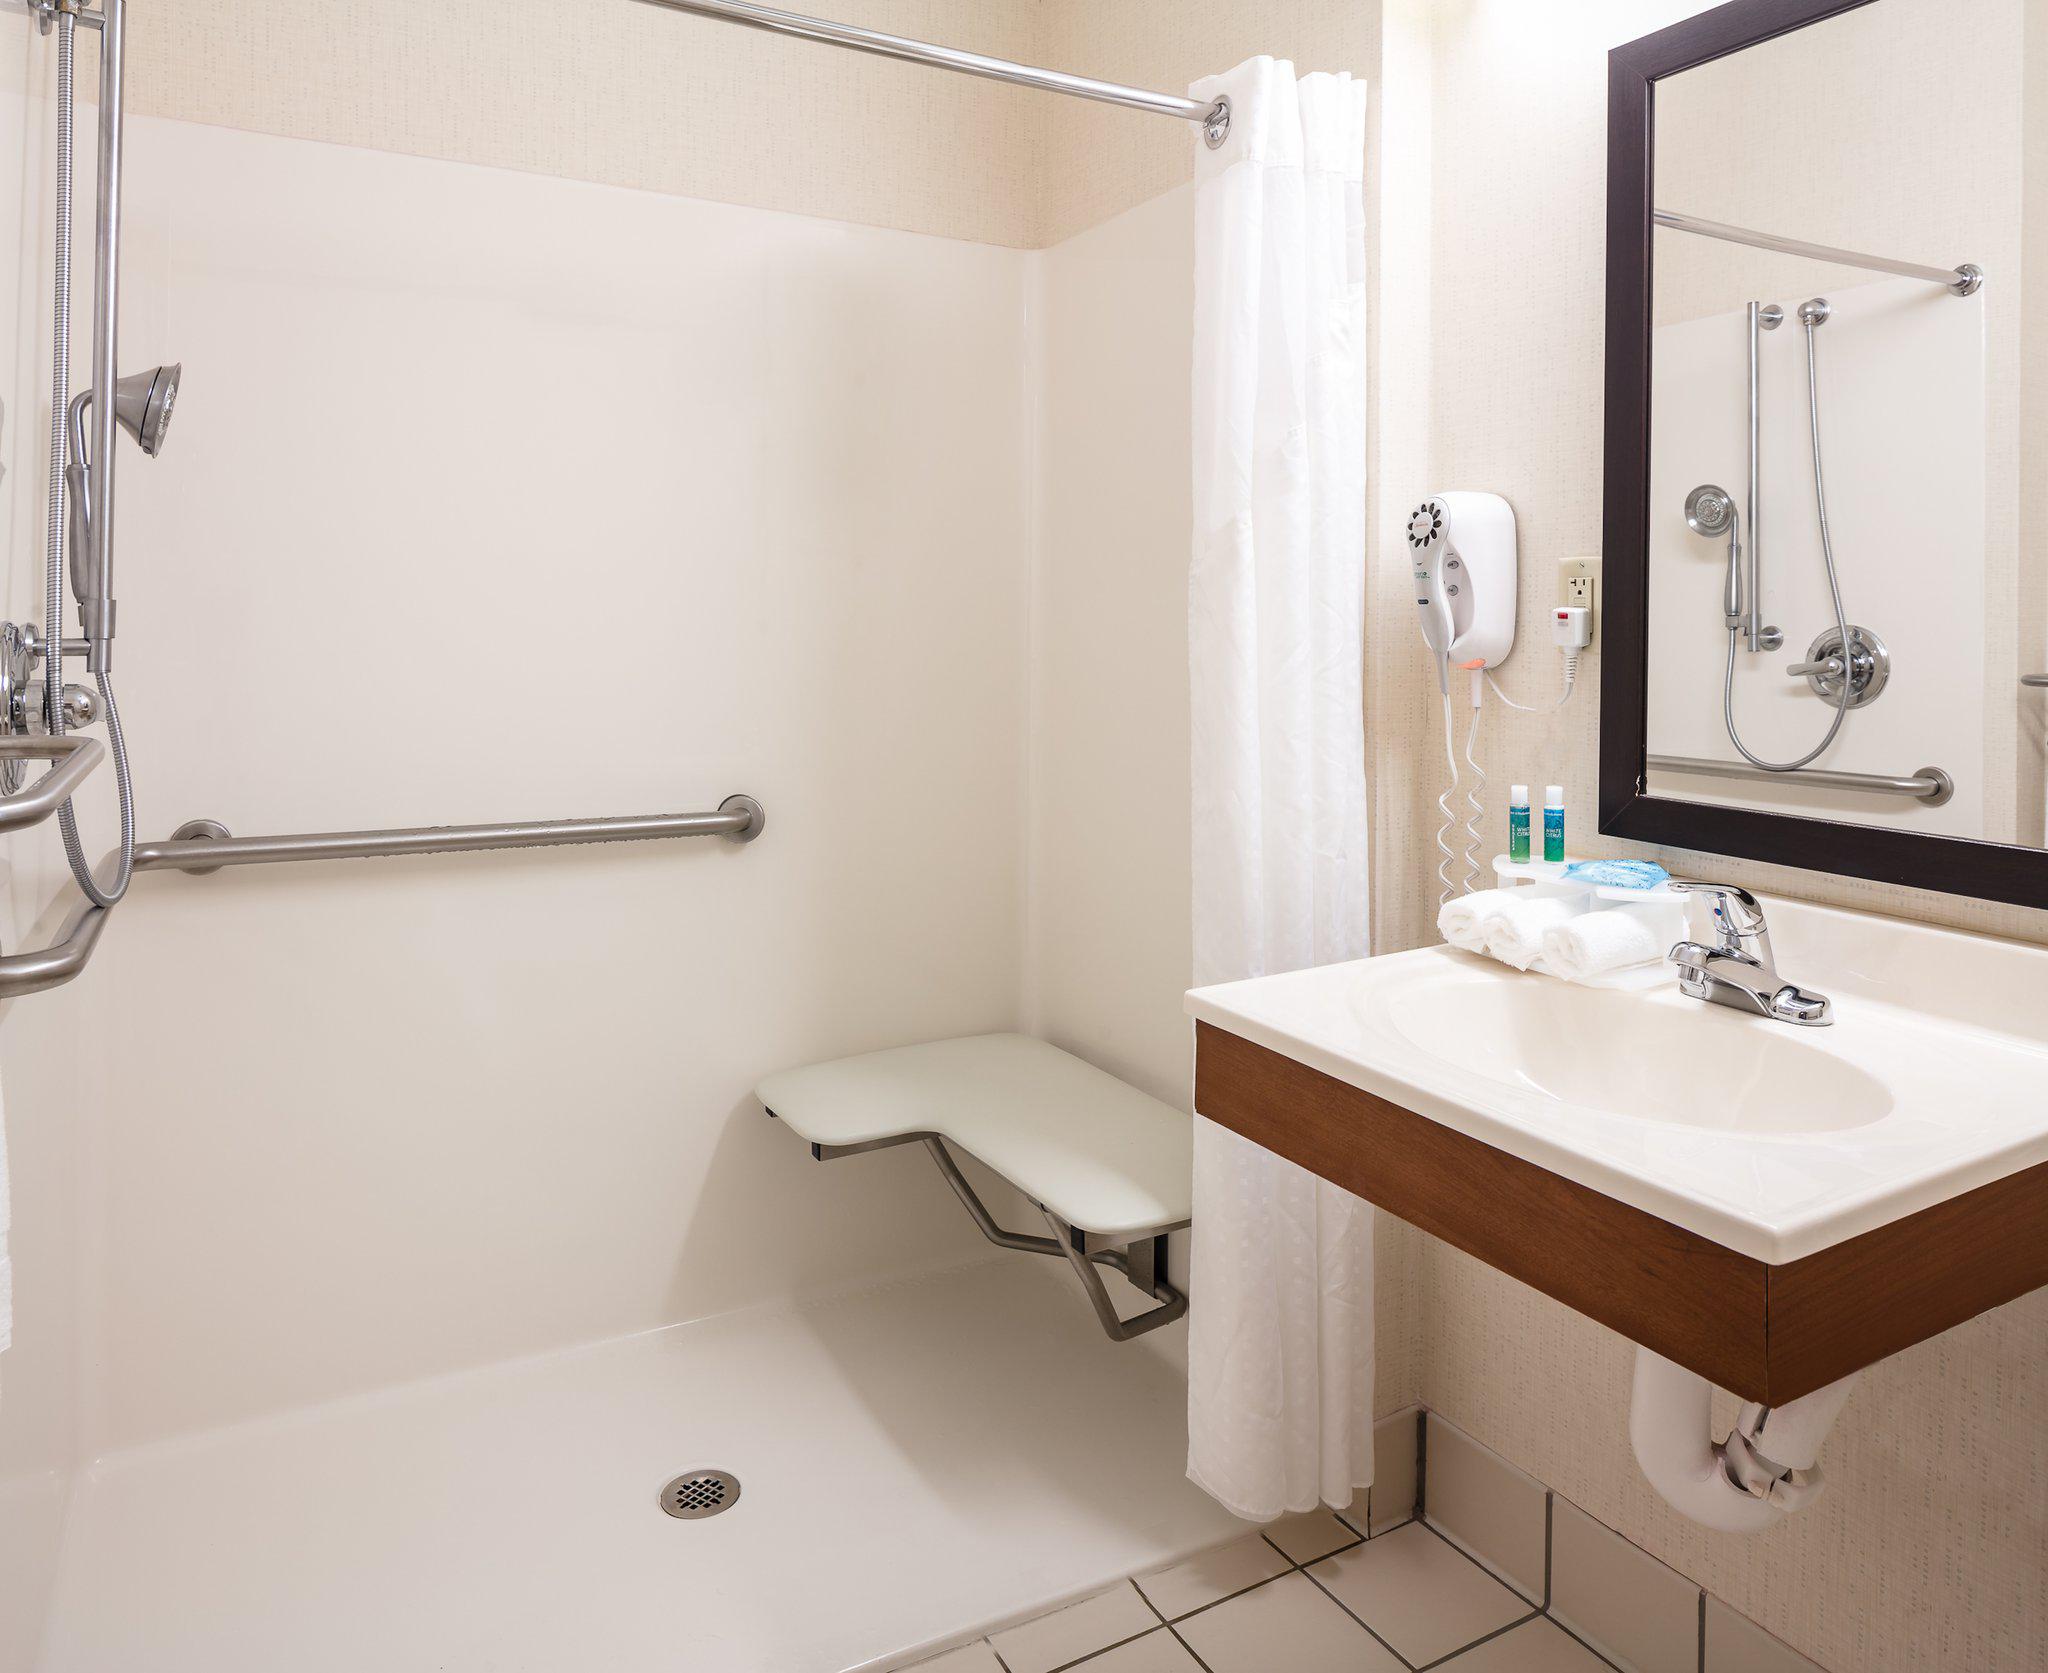 Holiday Inn Express & Suites Coralville Photo